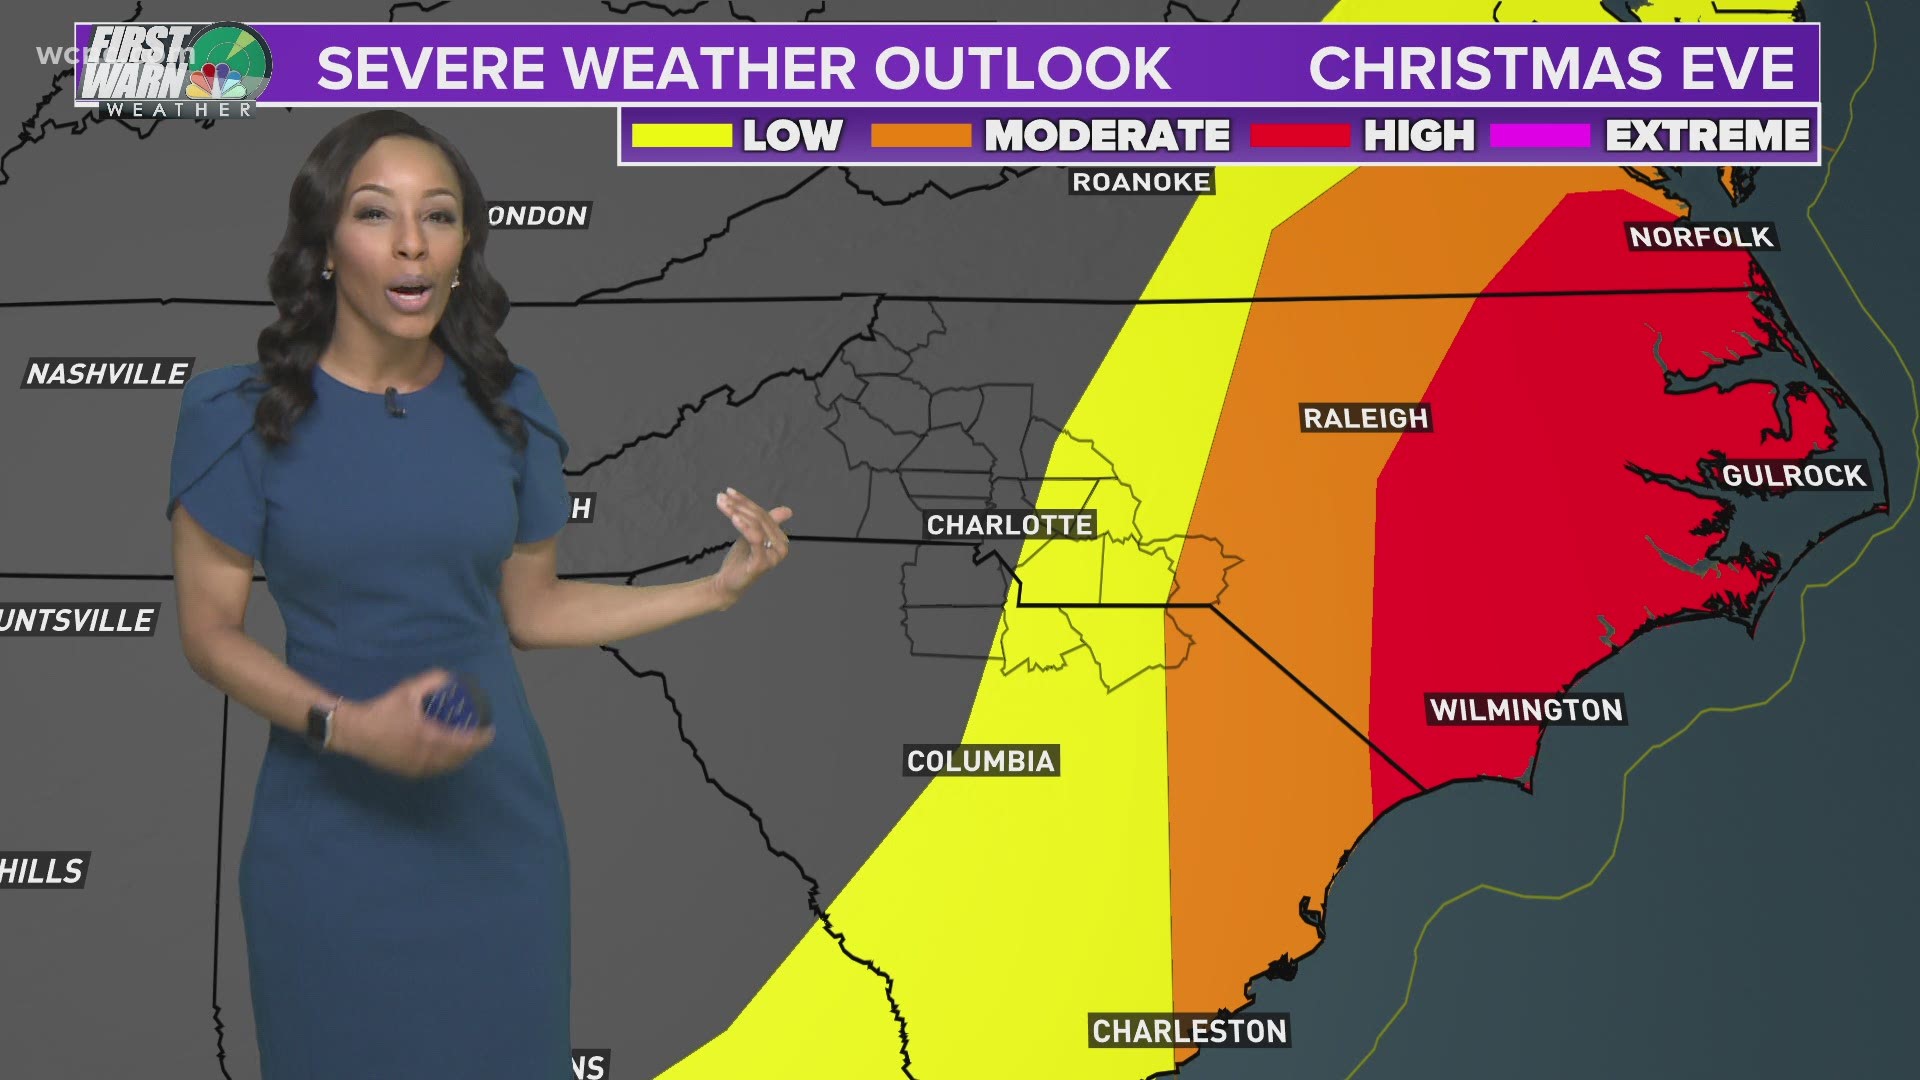 Severe weather possible on Christmas Eve in Charlotte